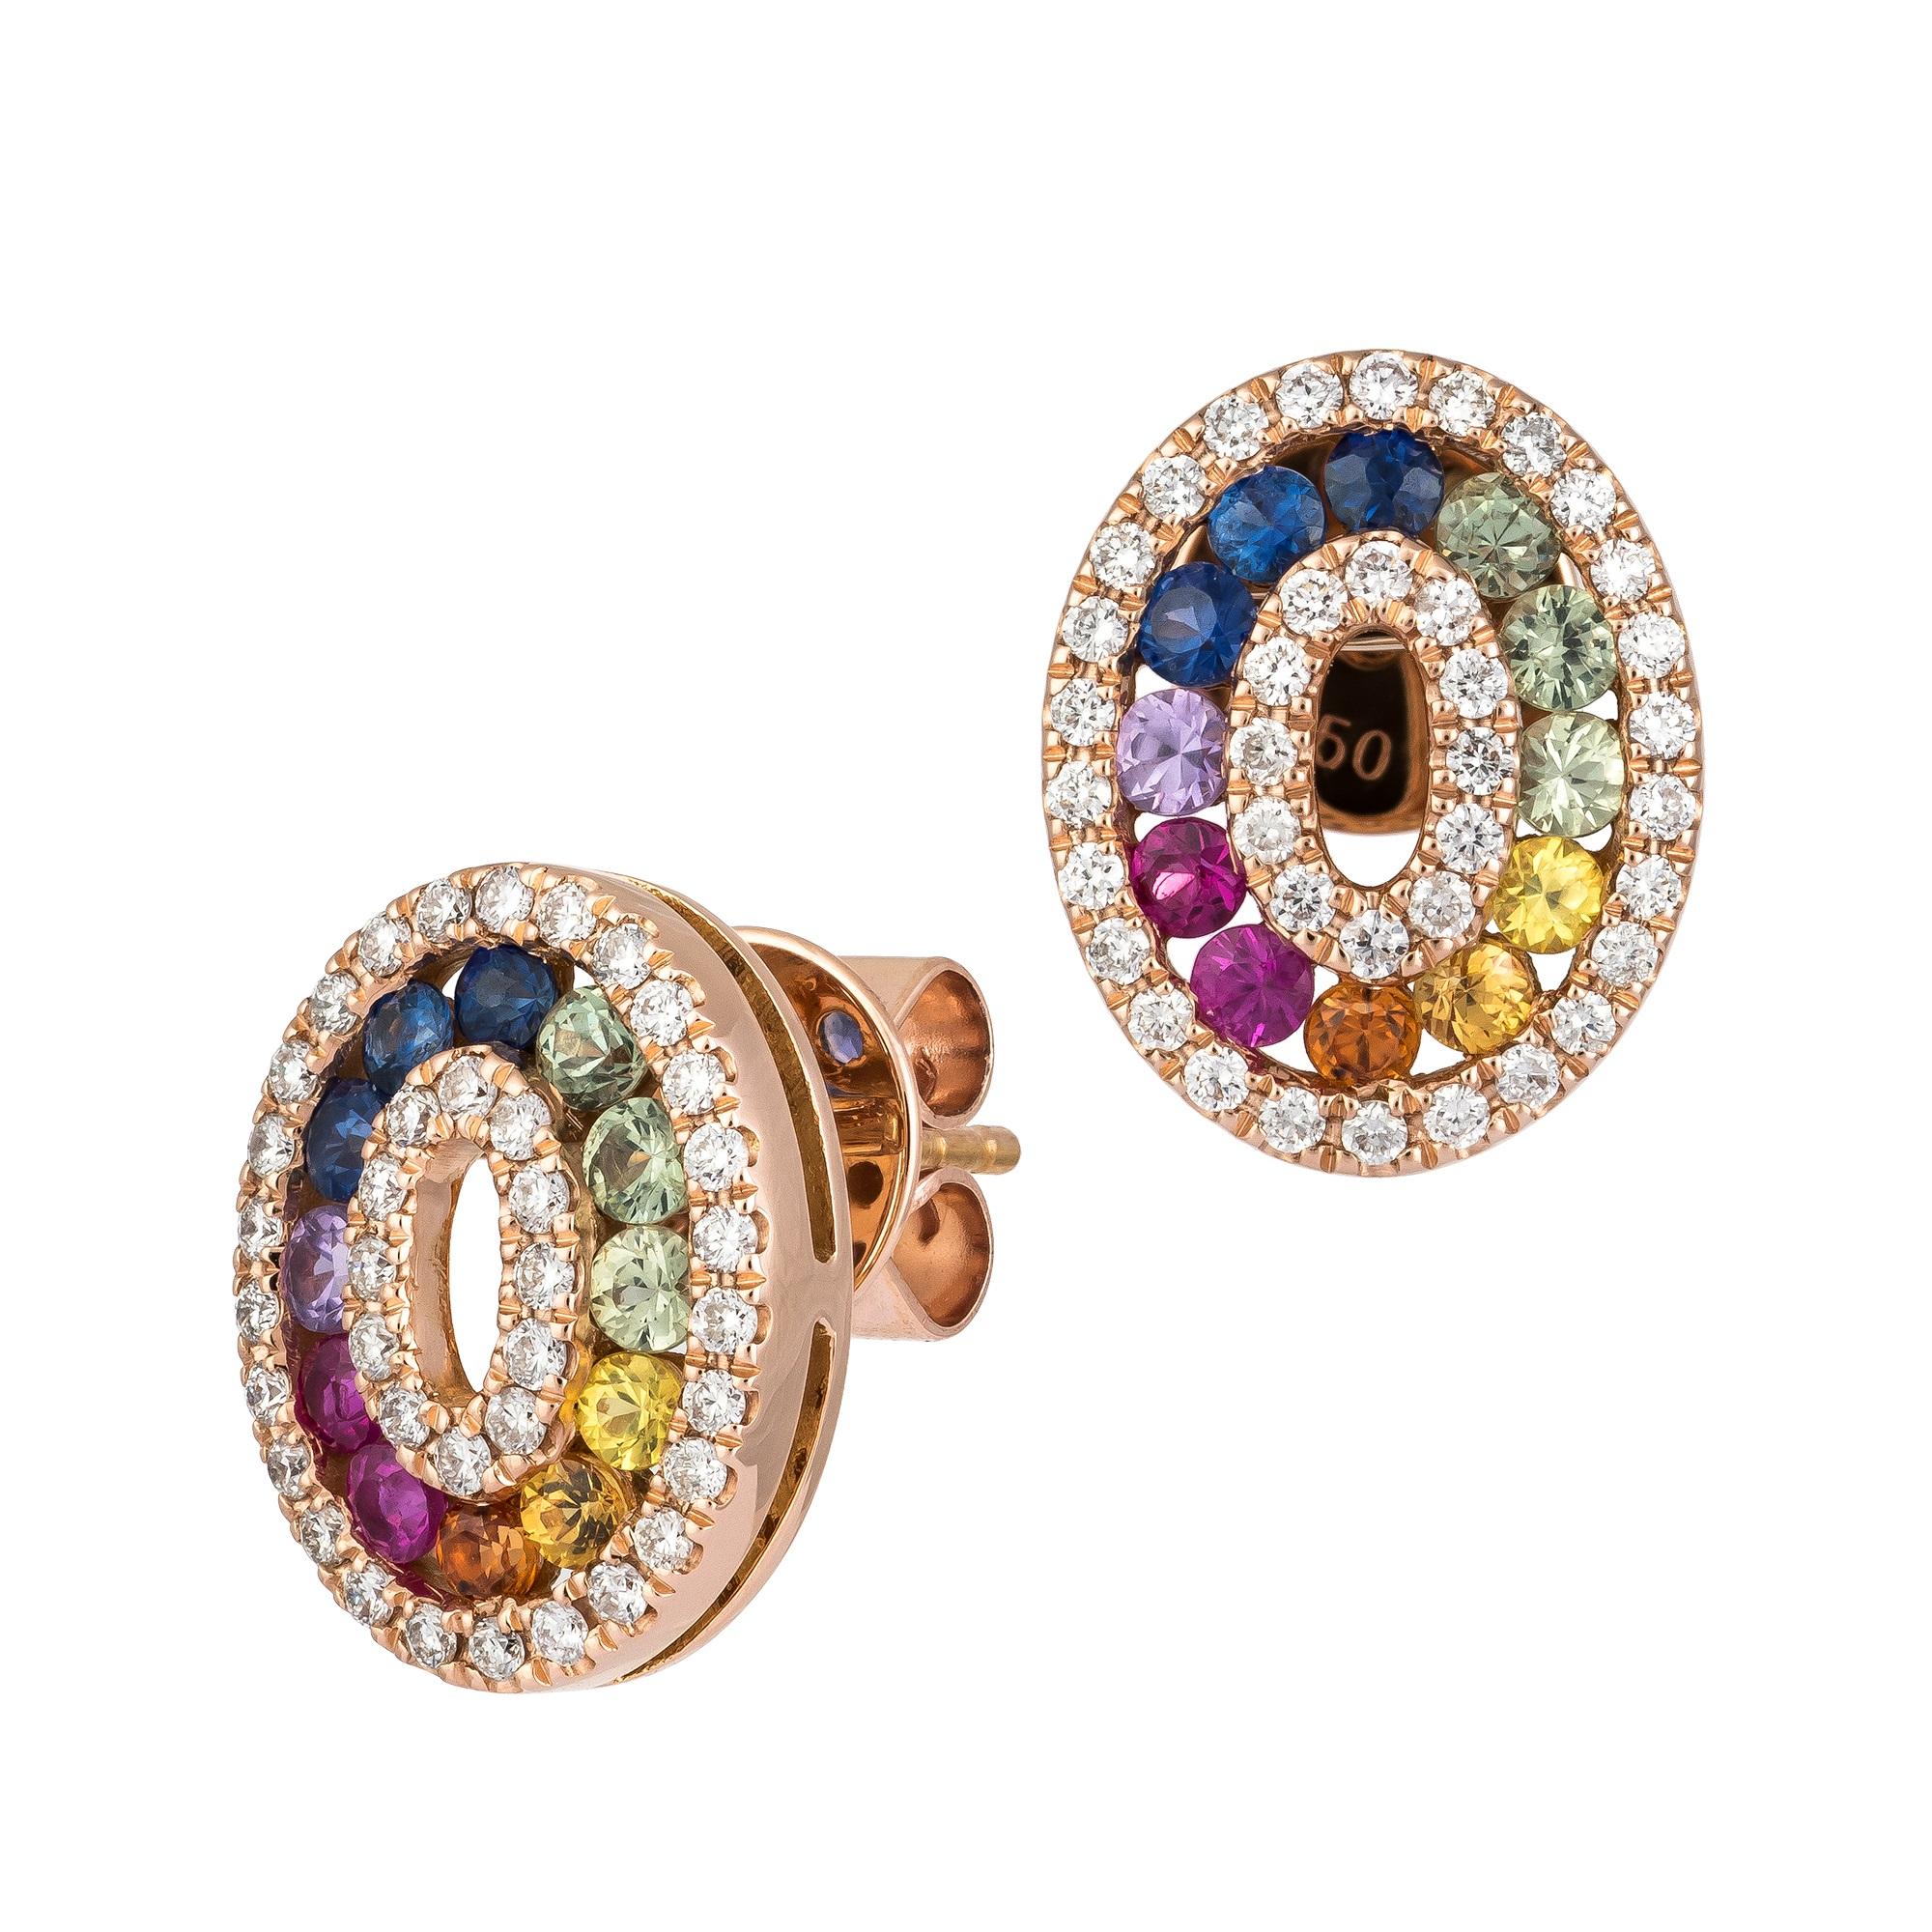 EARRING 18K Rose Gold Diamond 0.47 Cts/76 Pieces, Multi Sapphire 0.80 Cts/24 Pieces
